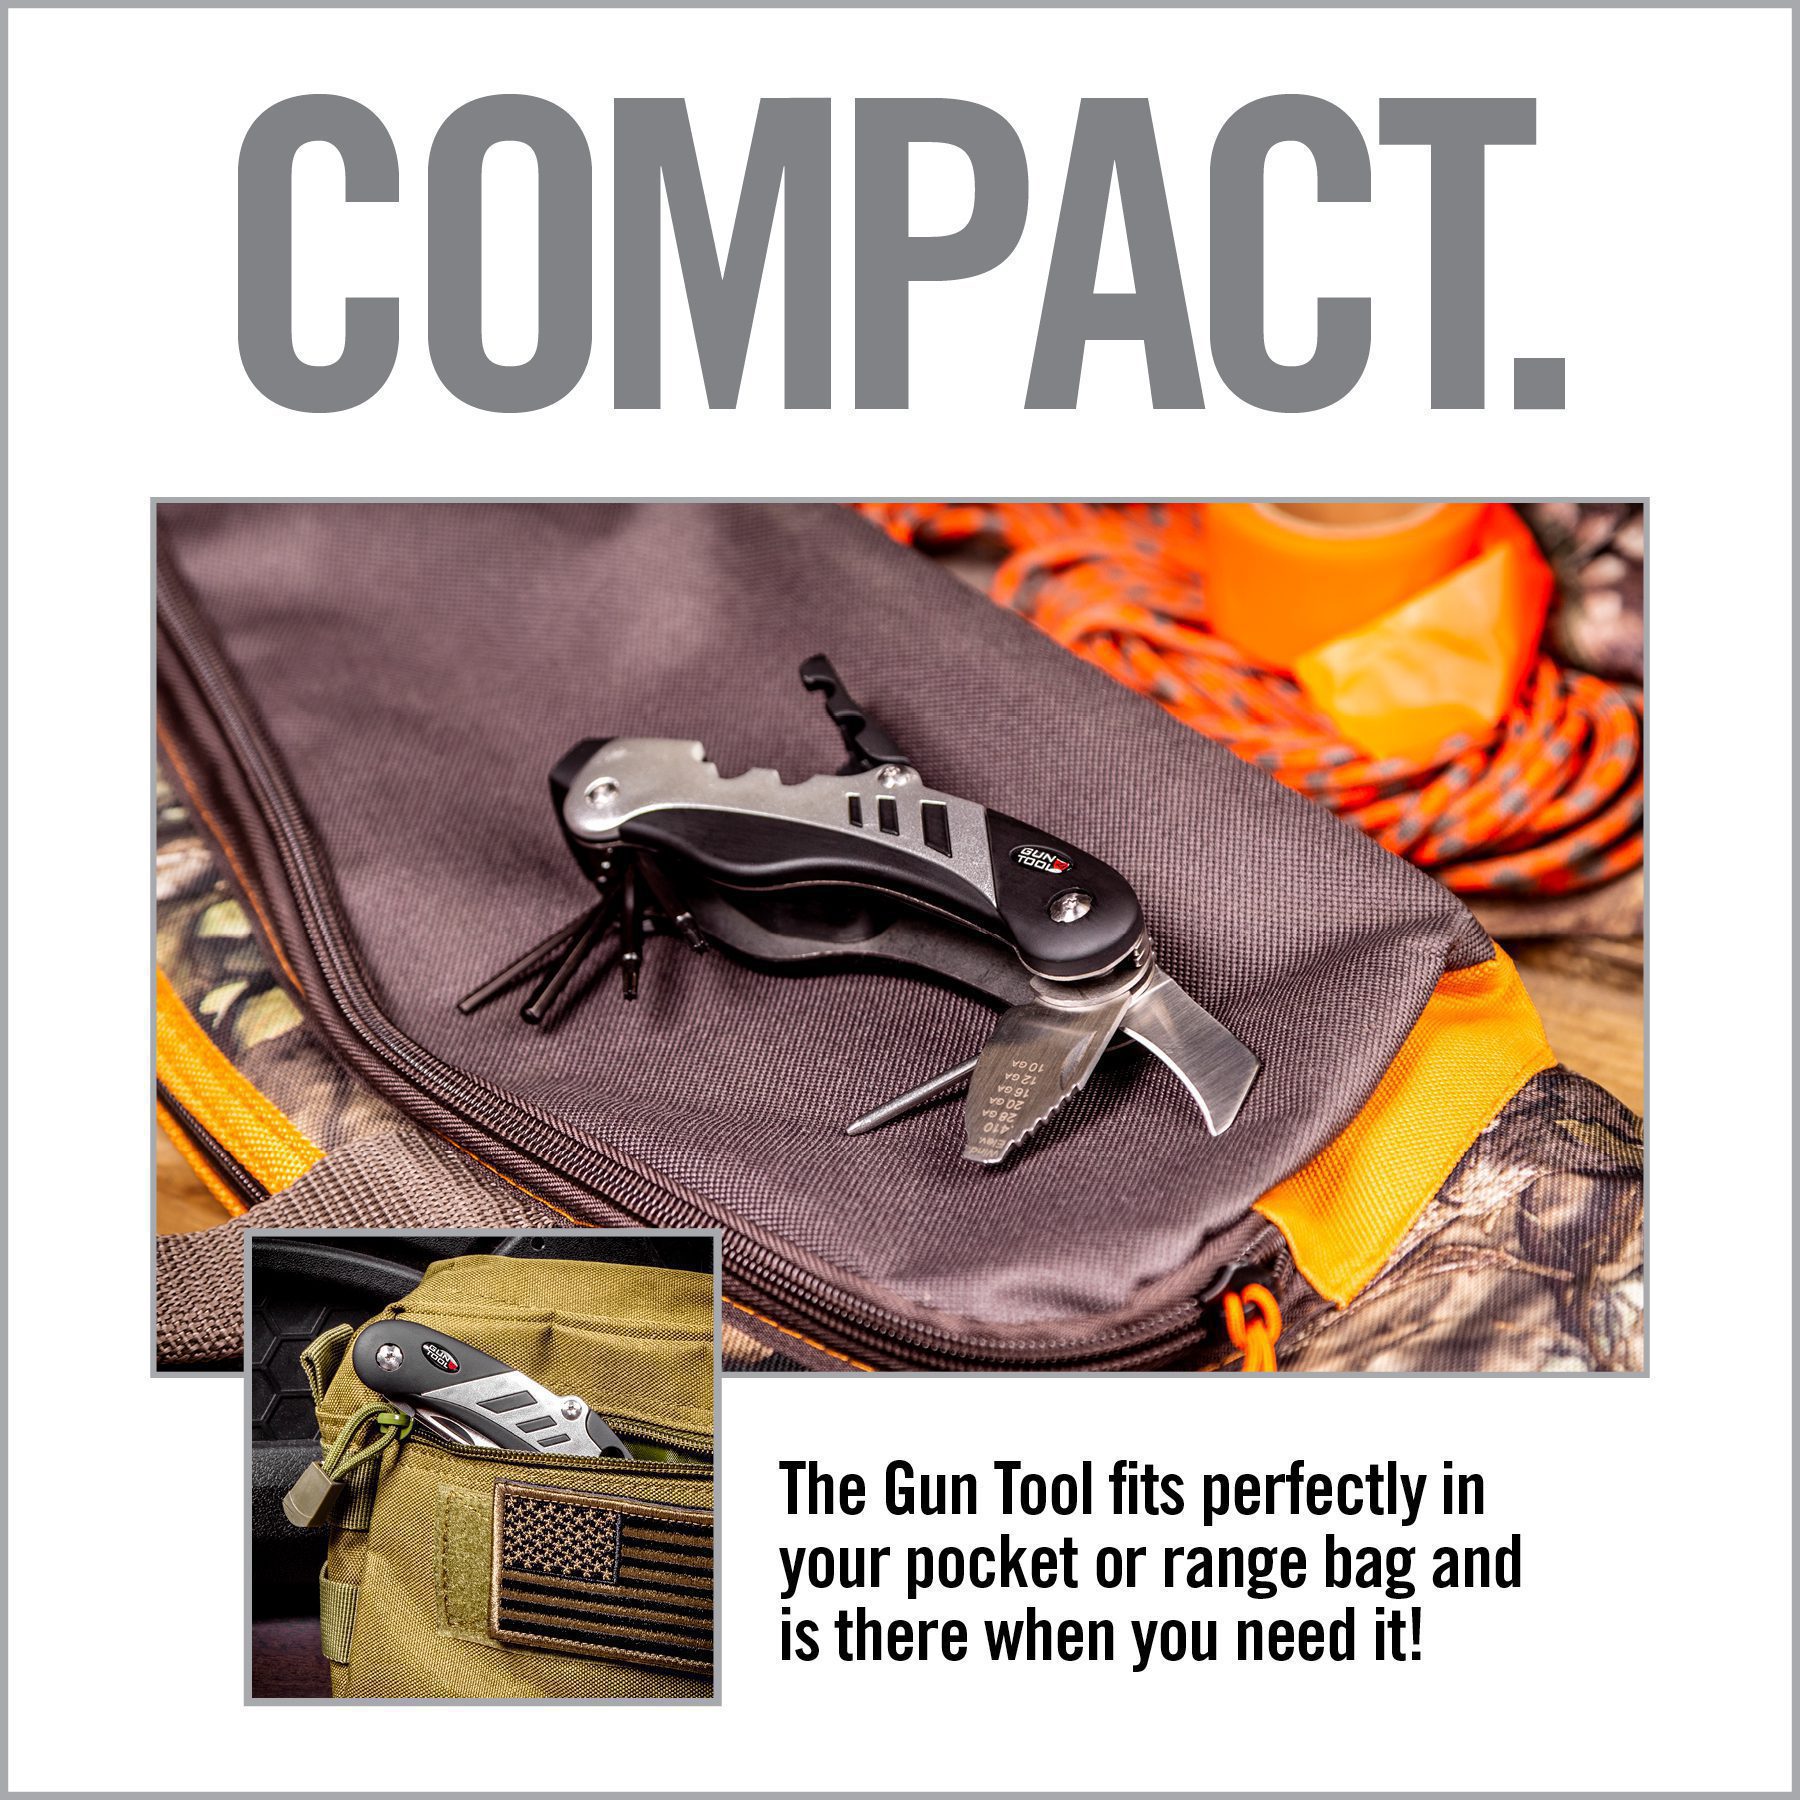 the gun tool fits perfectly in your pocket or range bag